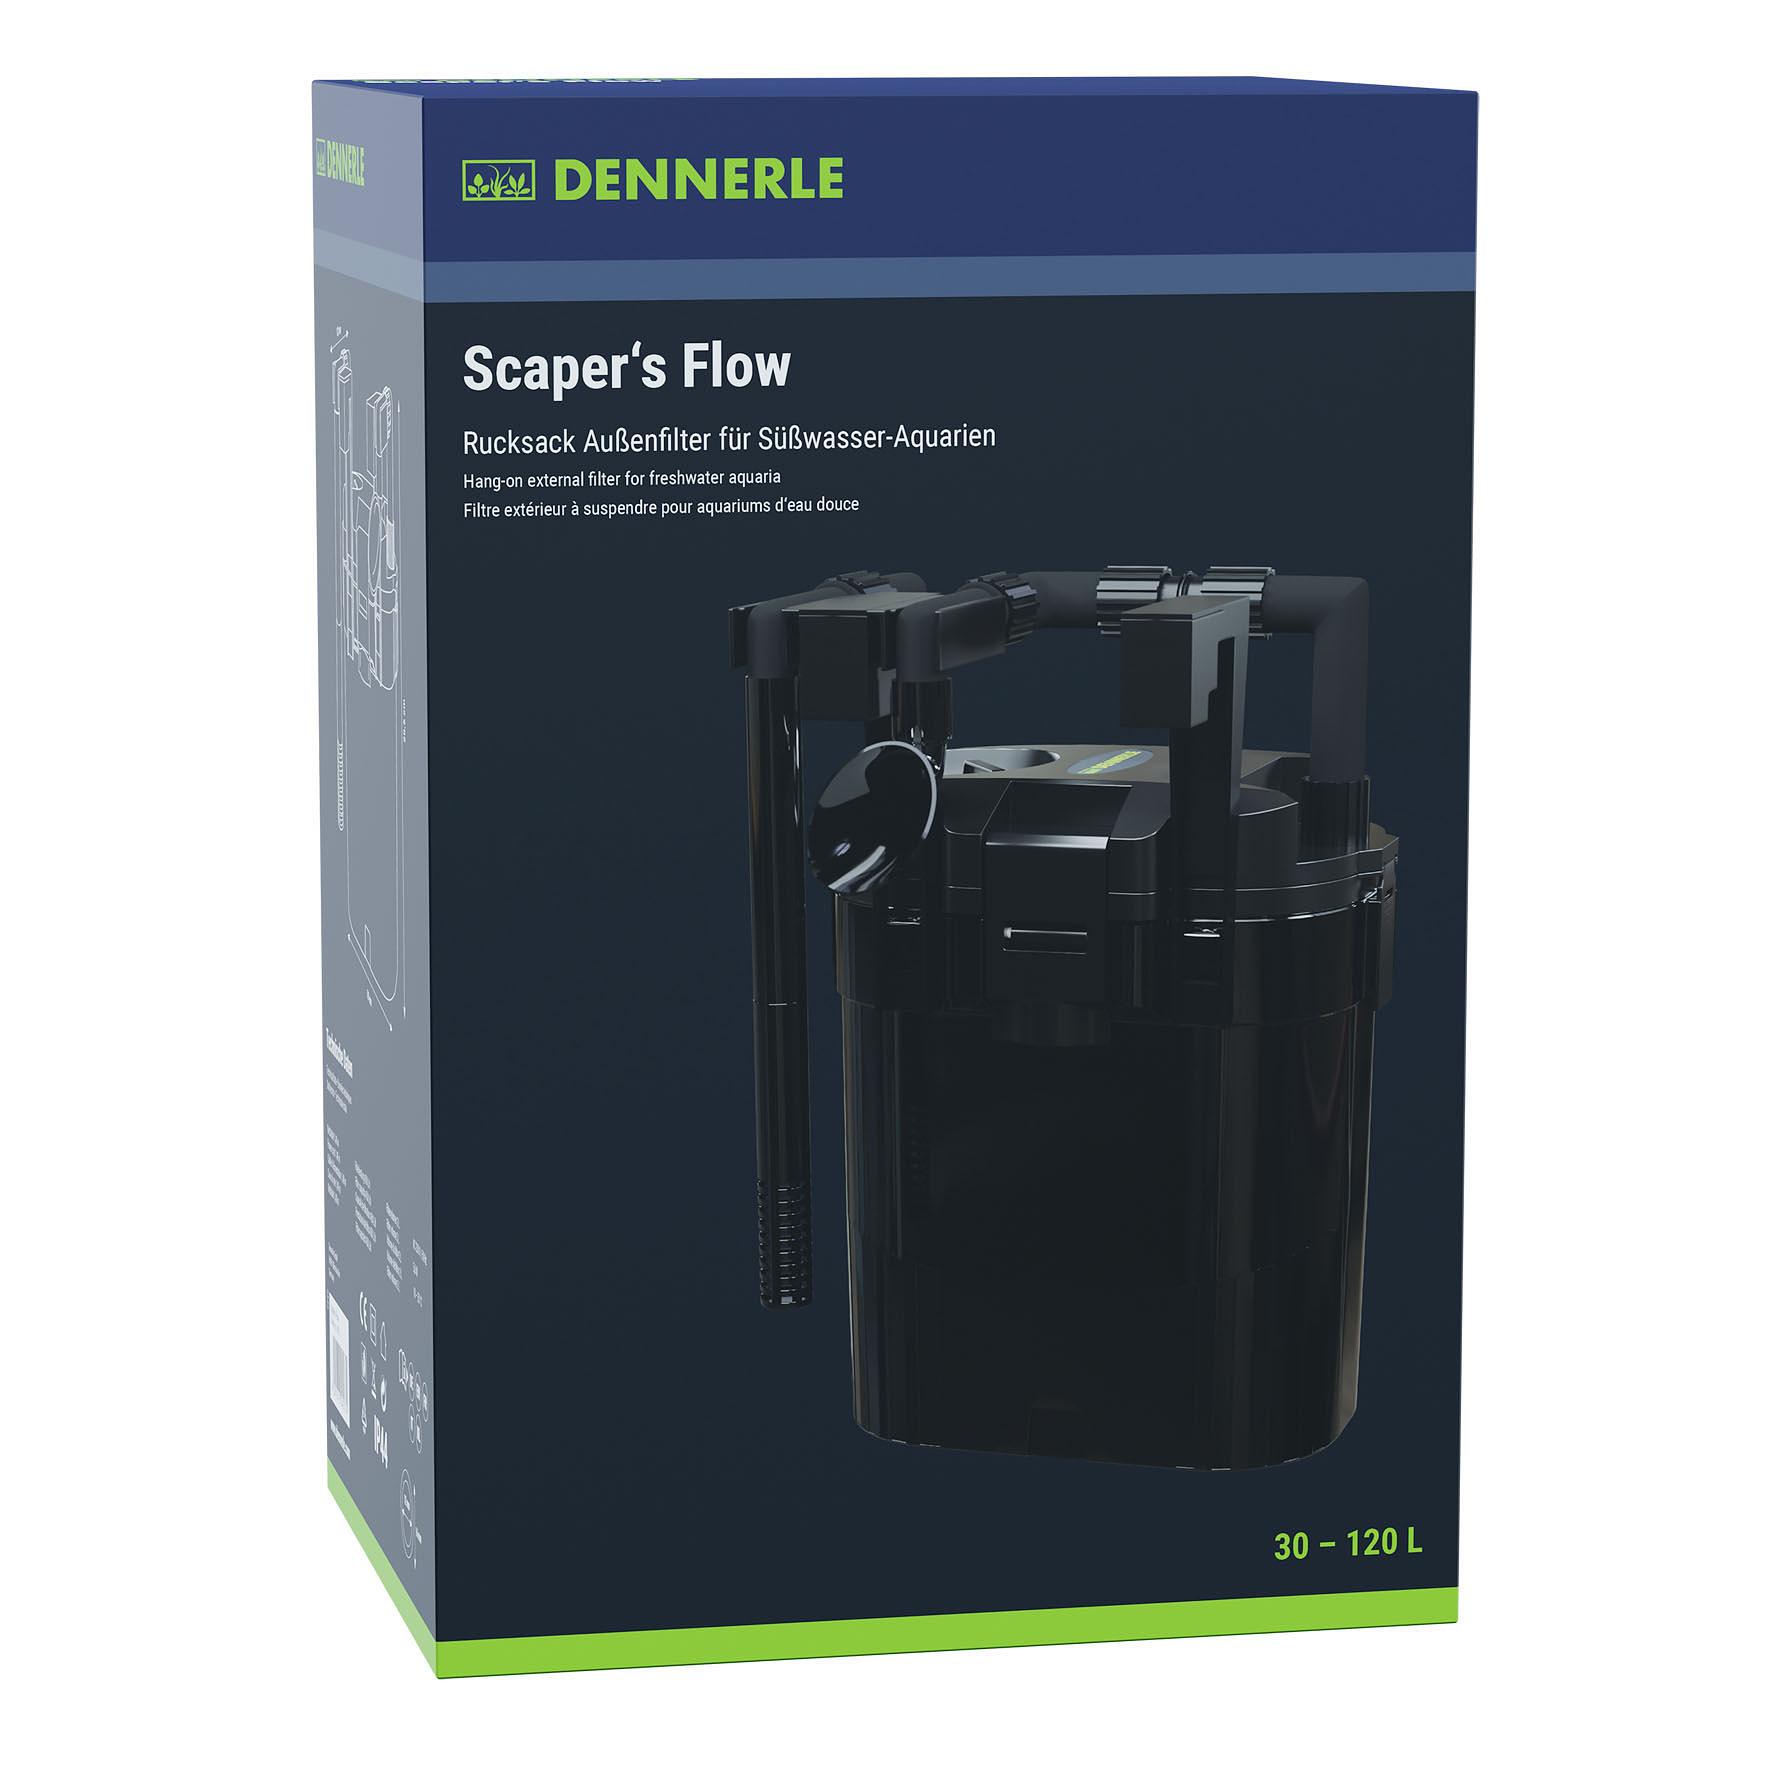 Dennerle Scaper's Flow, 450L/h, 5.6W